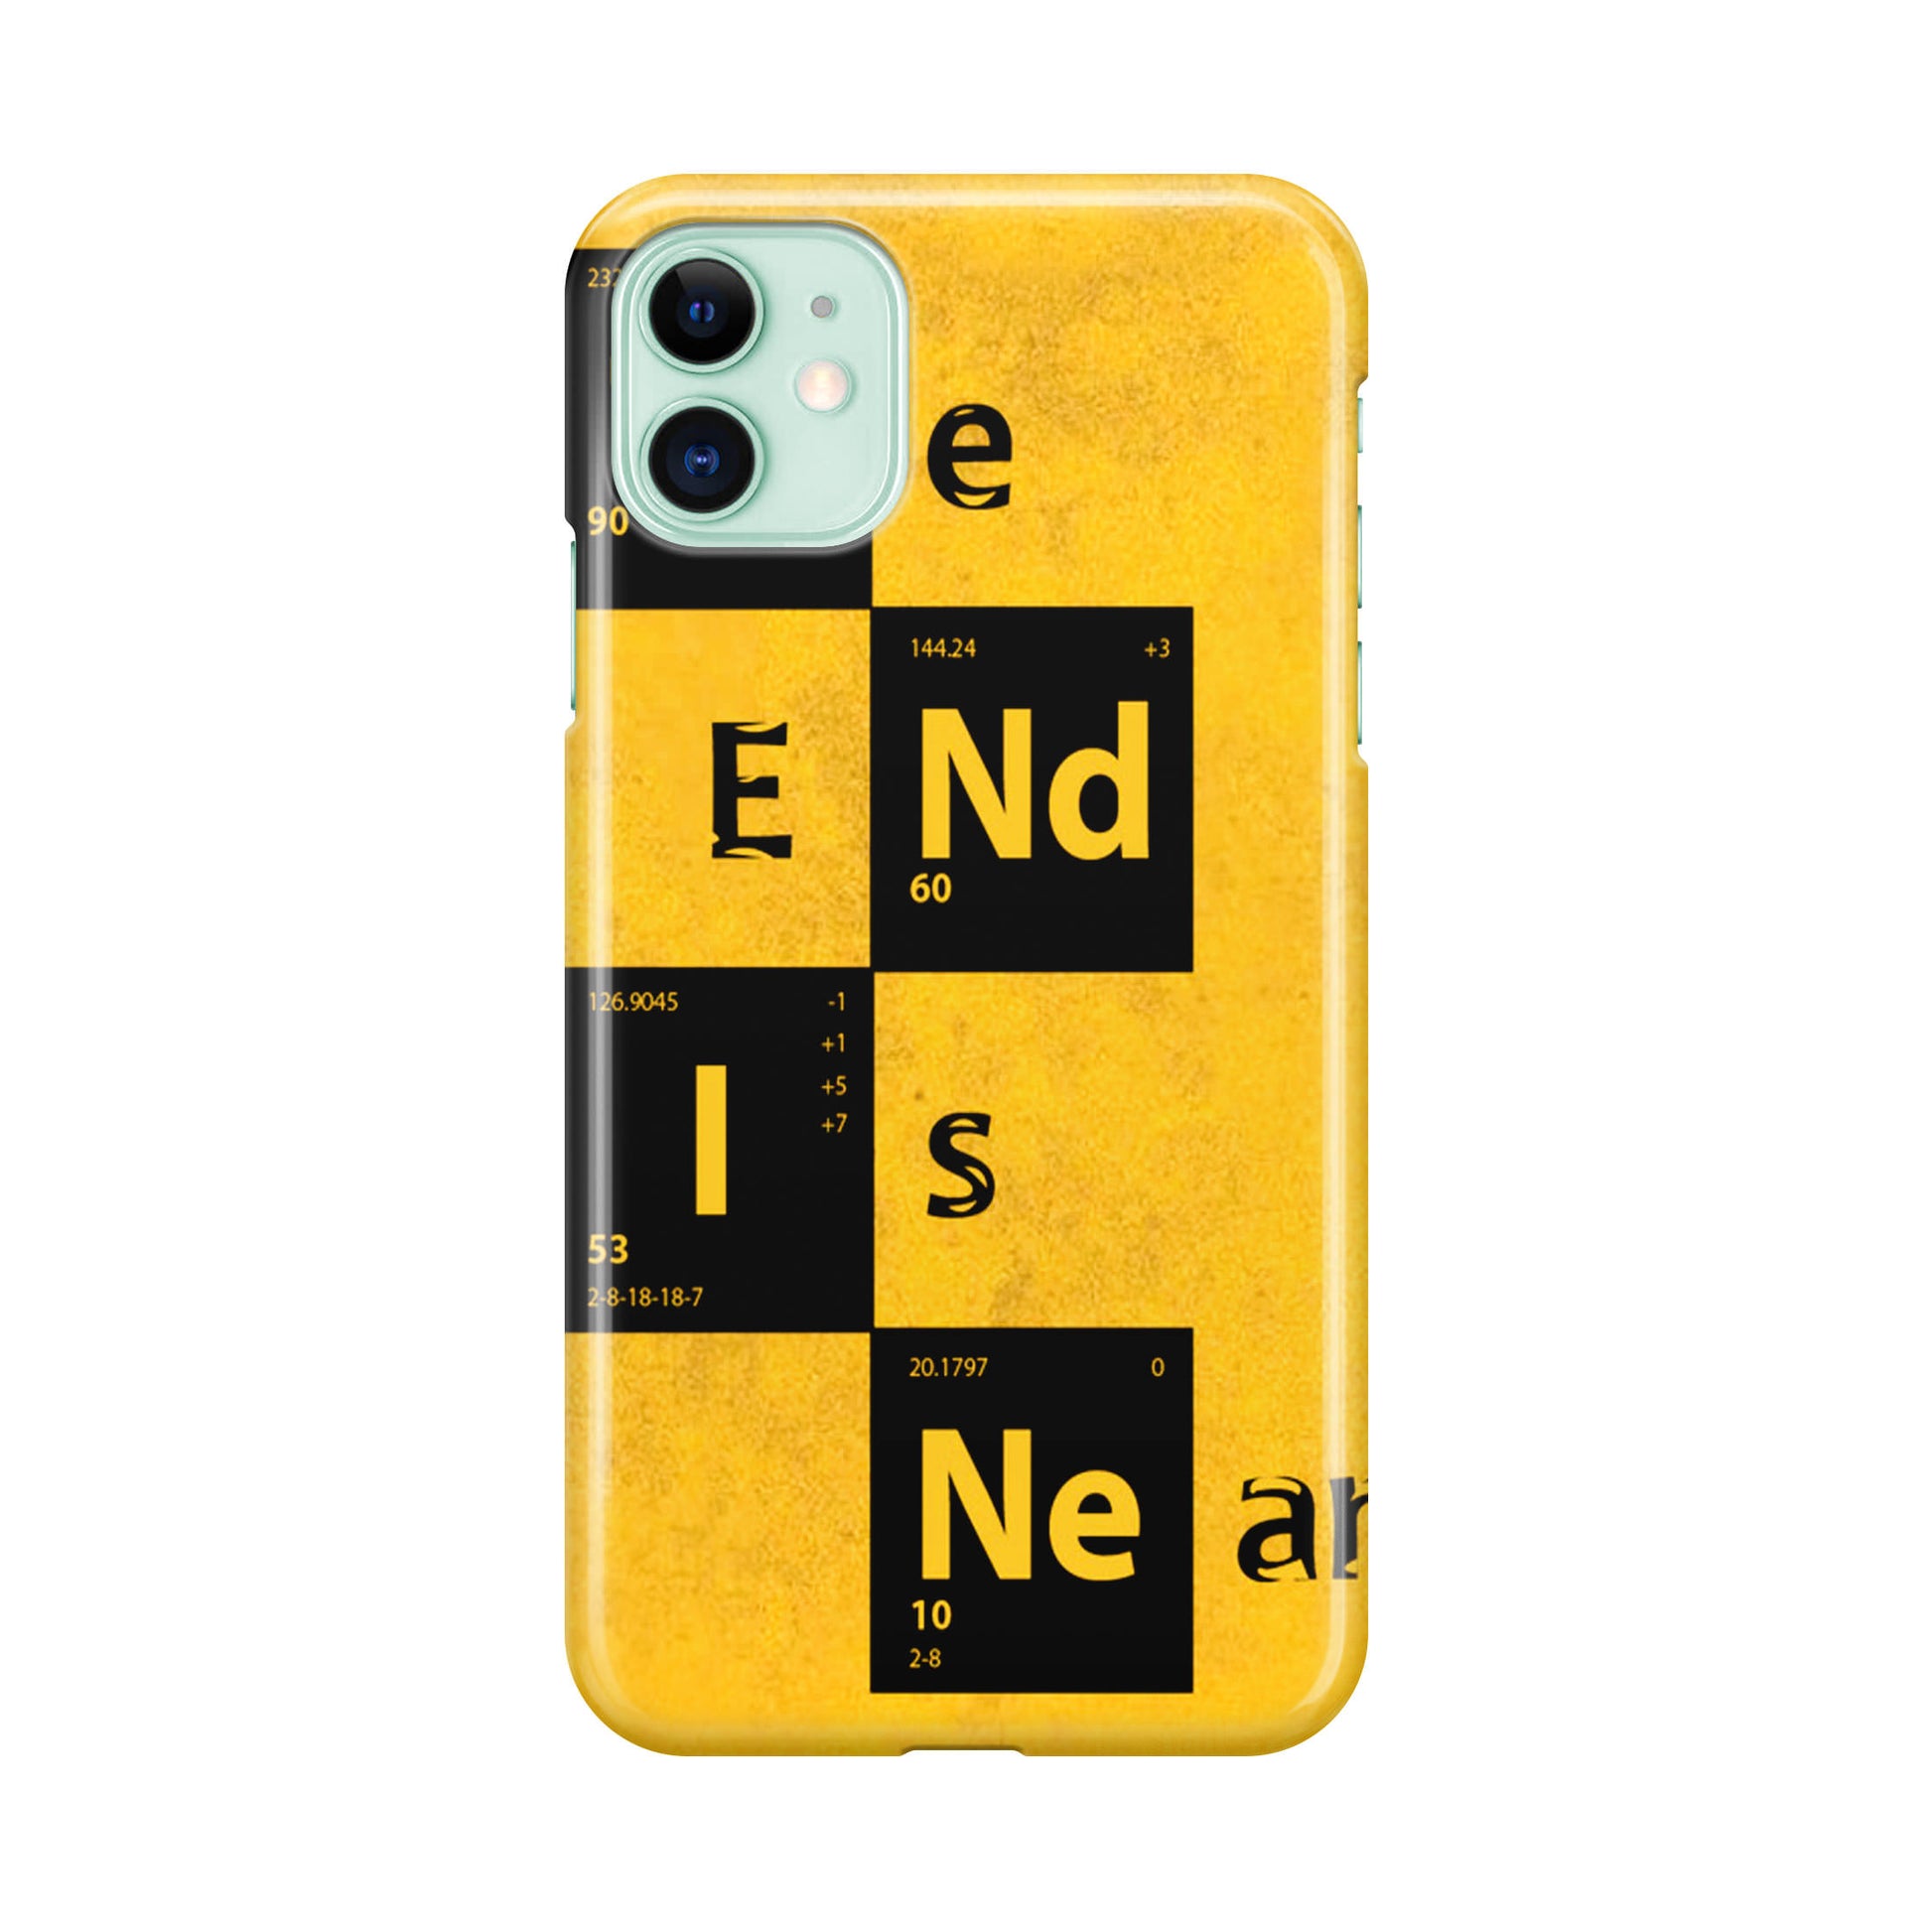 The End Is Near iPhone 12 Case